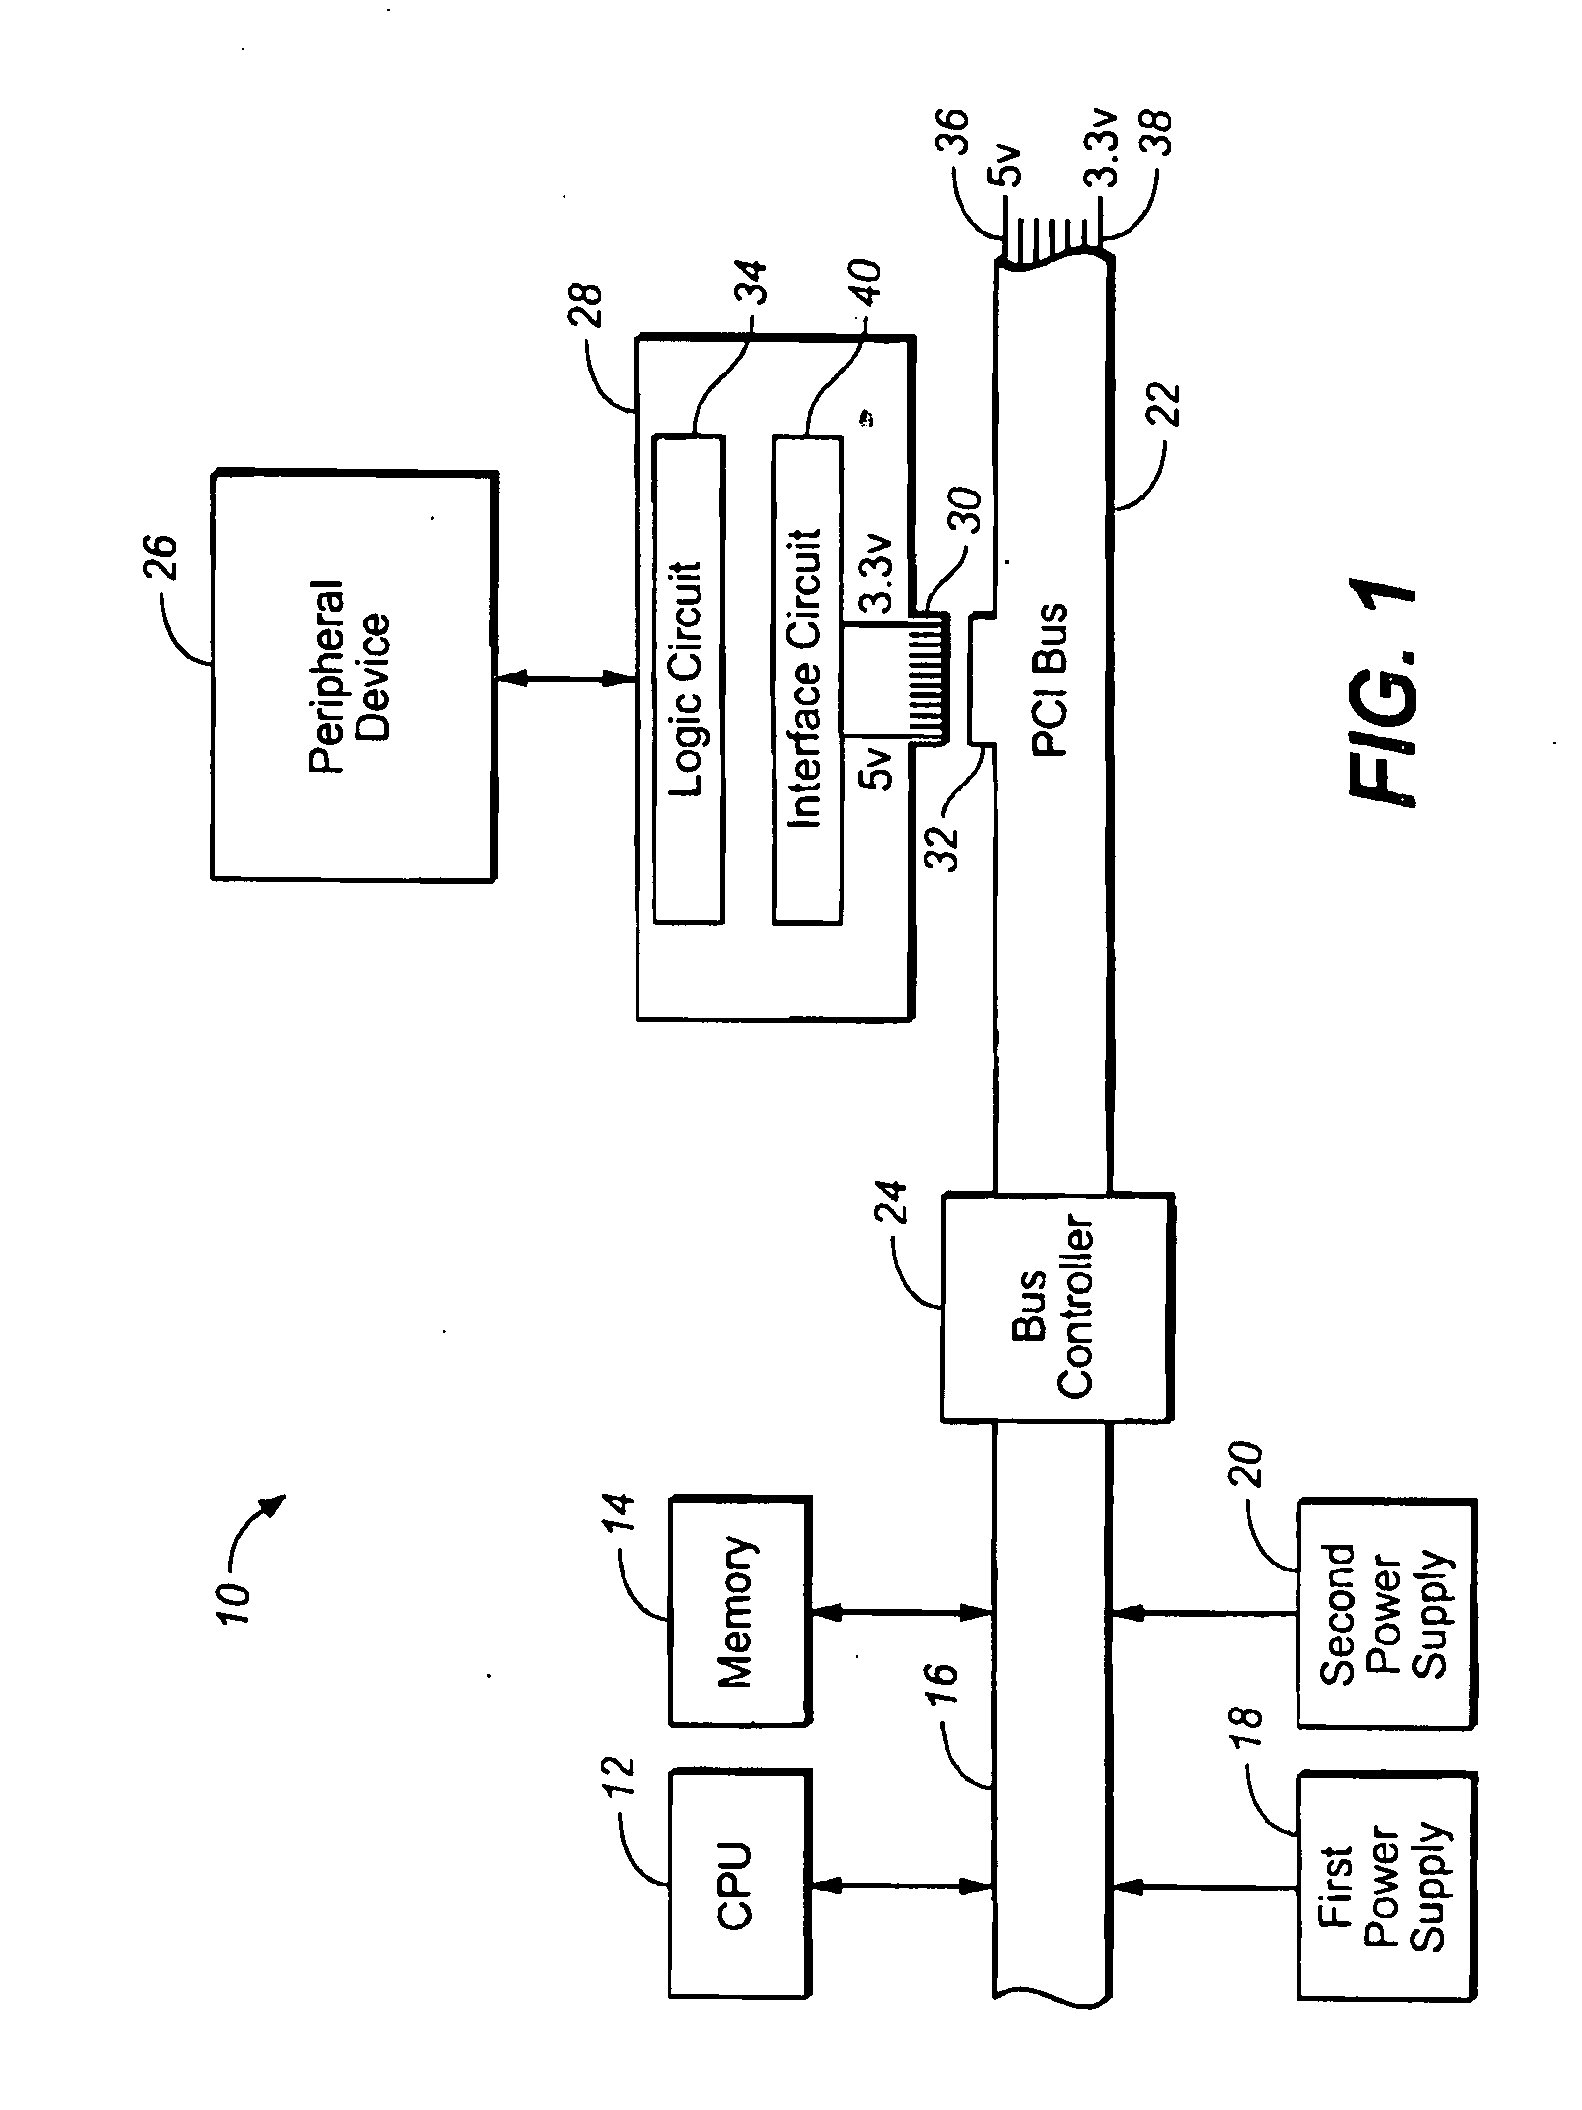 Interface circuit for providing a computer logic circuit with first and second voltages and an associated method